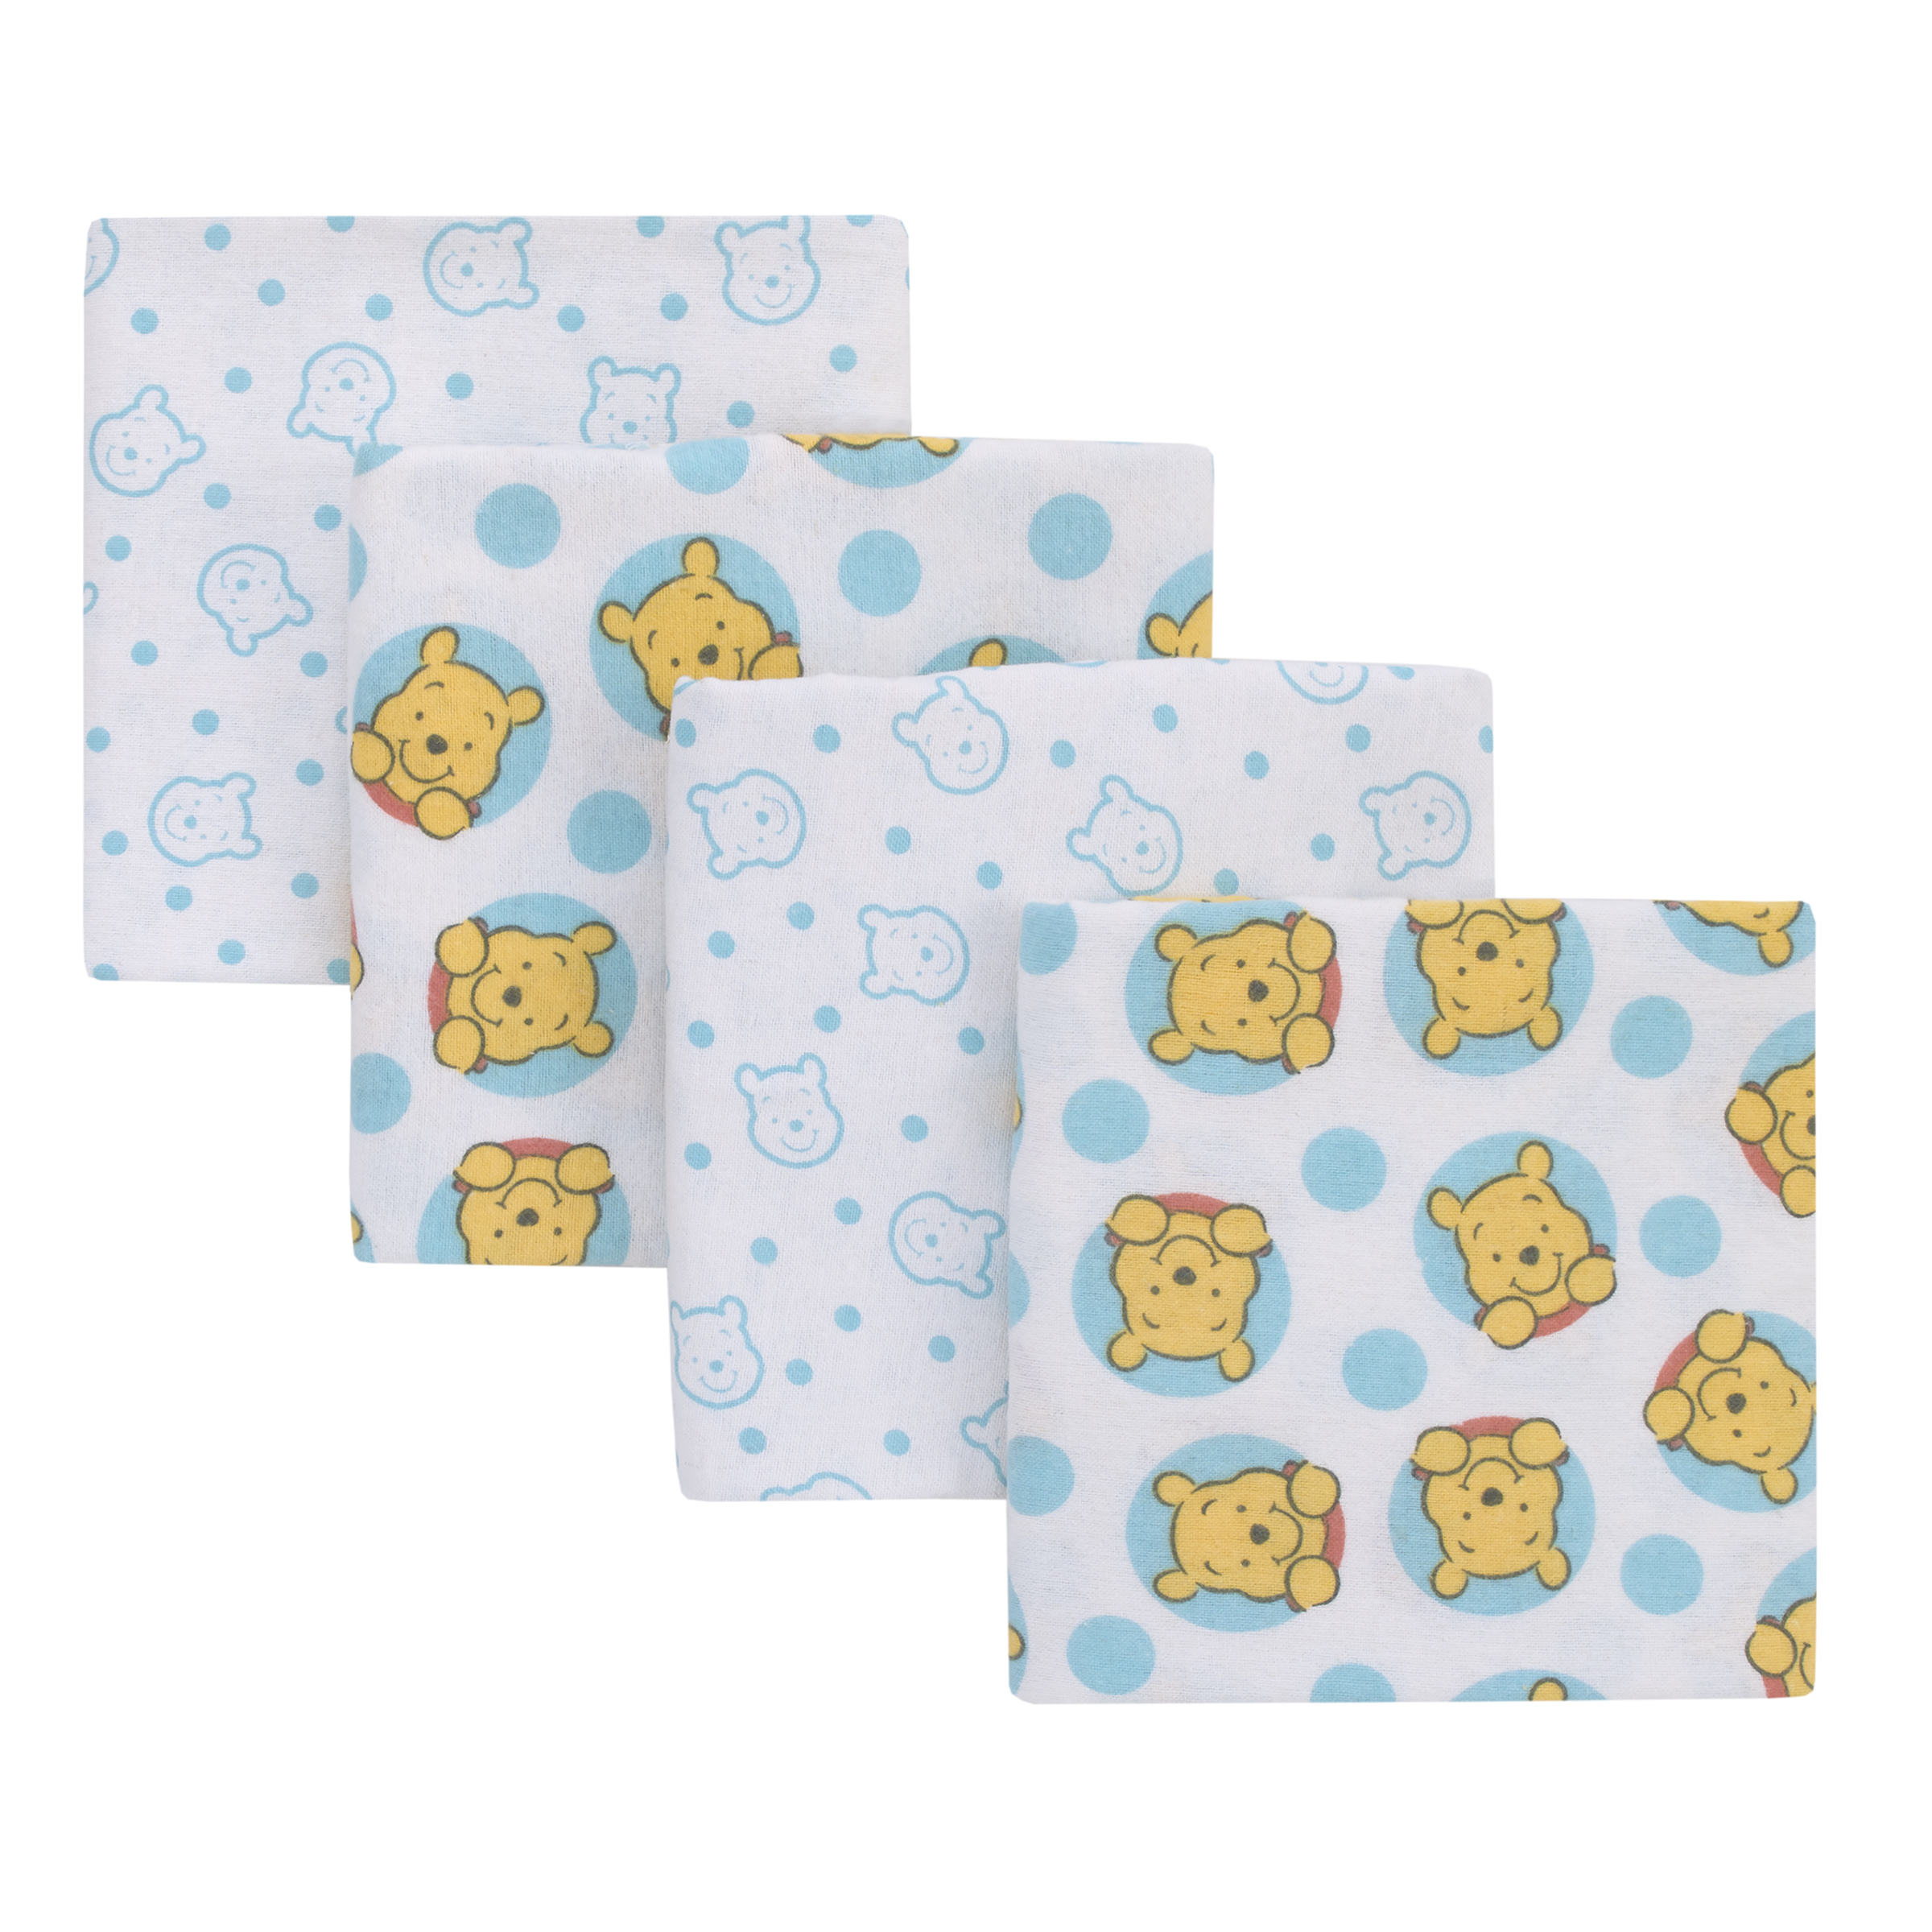 Disney Winnie the Pooh so Loved 4-PK Cotton Receiving Blankets, Yellow, Aqua, Boy and Girl Infant - image 2 of 8